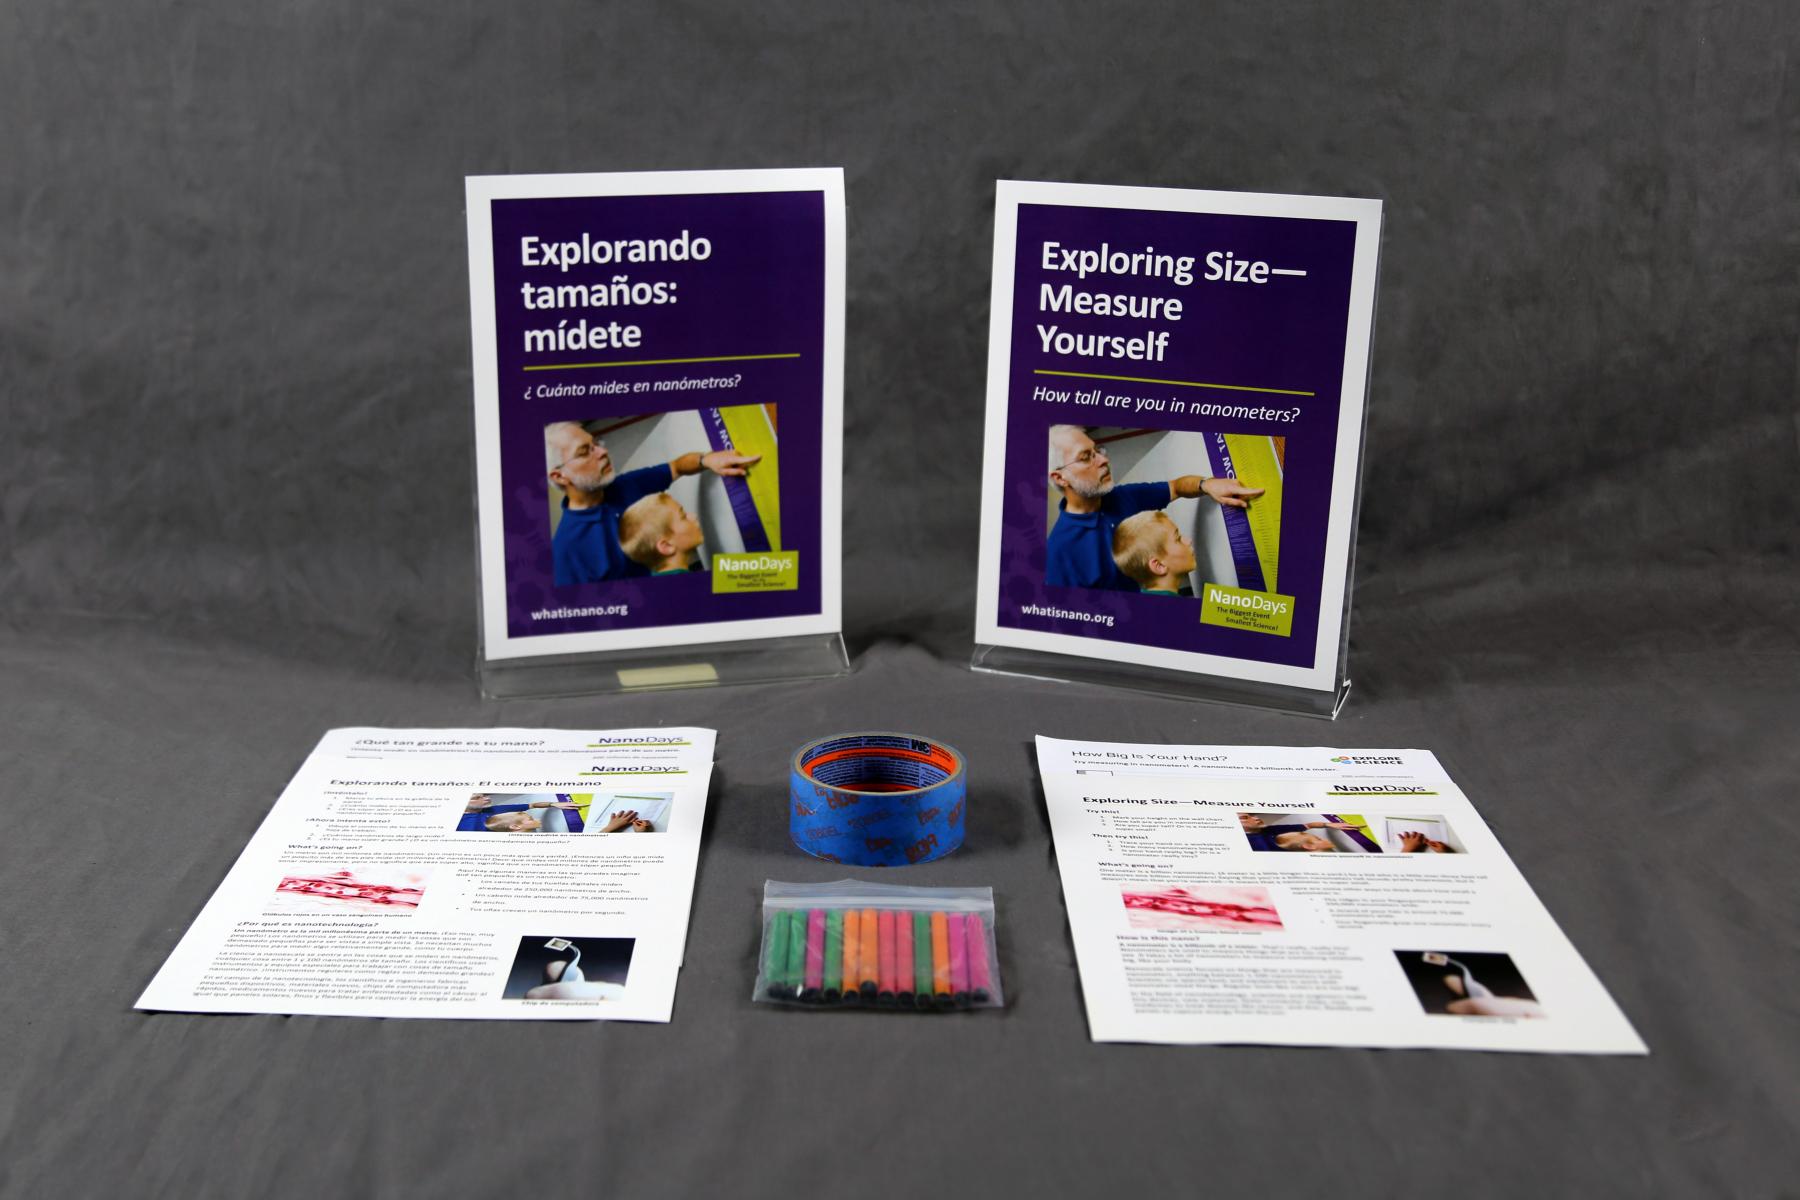 Measure yourself activity components including signs, activity materials and guides.